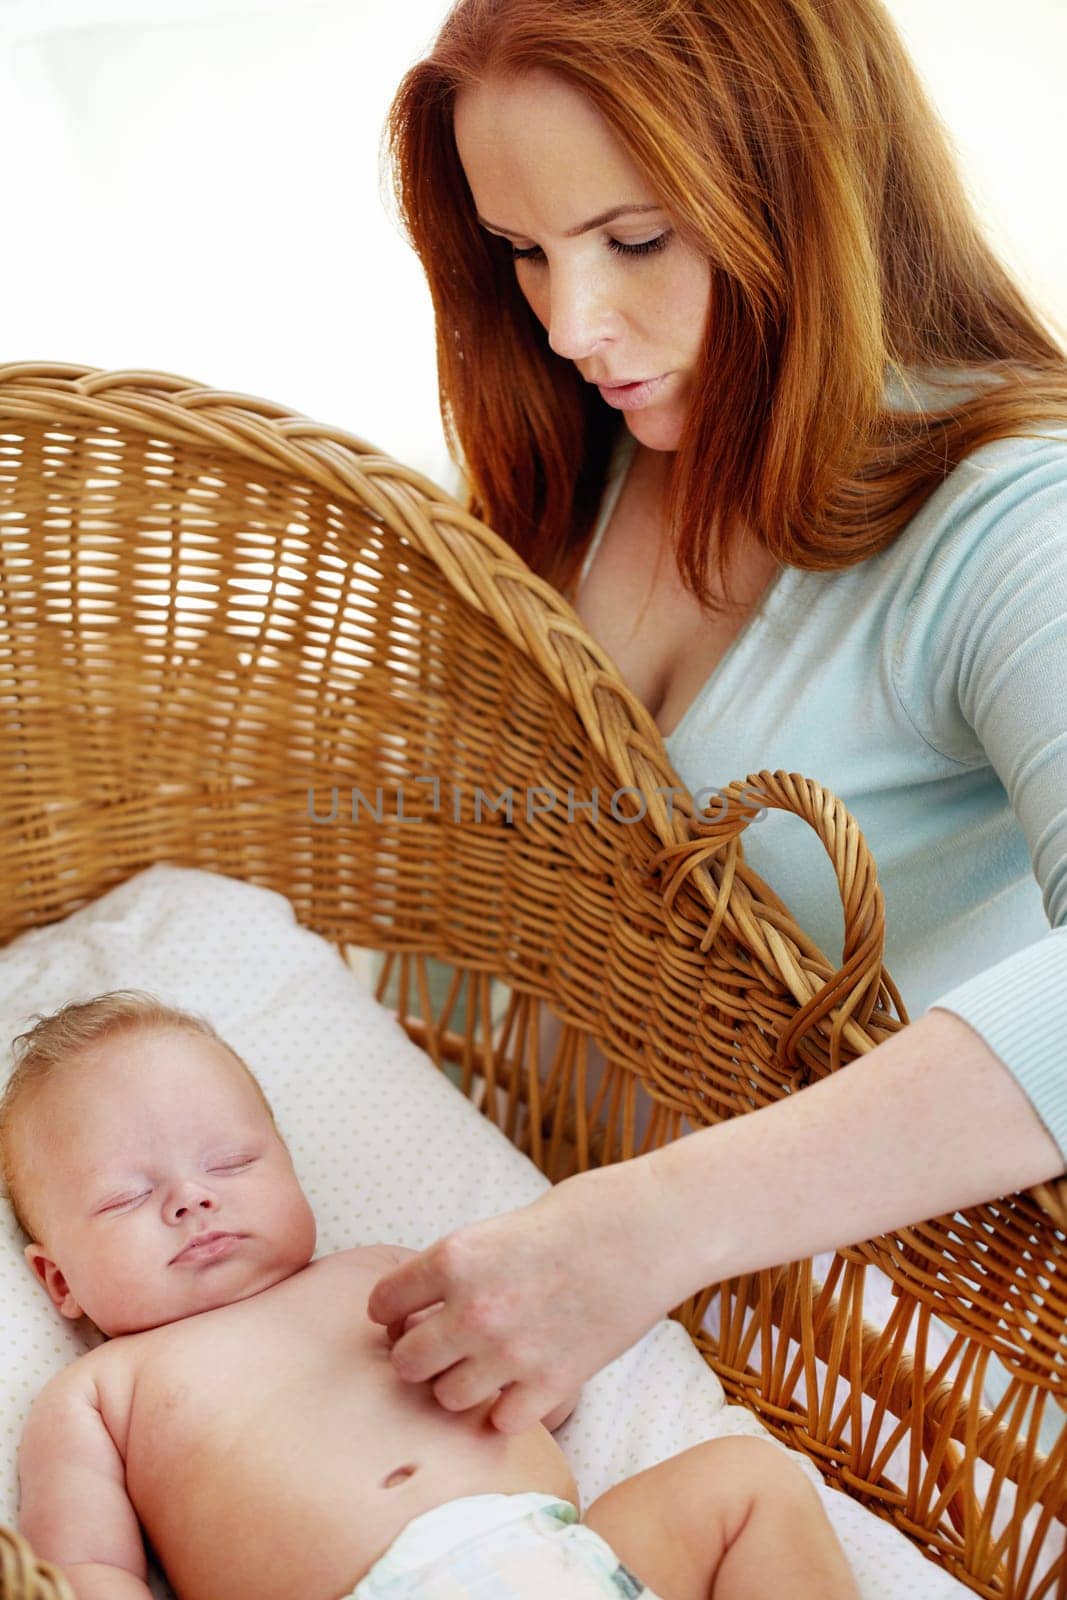 Im right here. a loving mother checking her sleeping baby in a crib